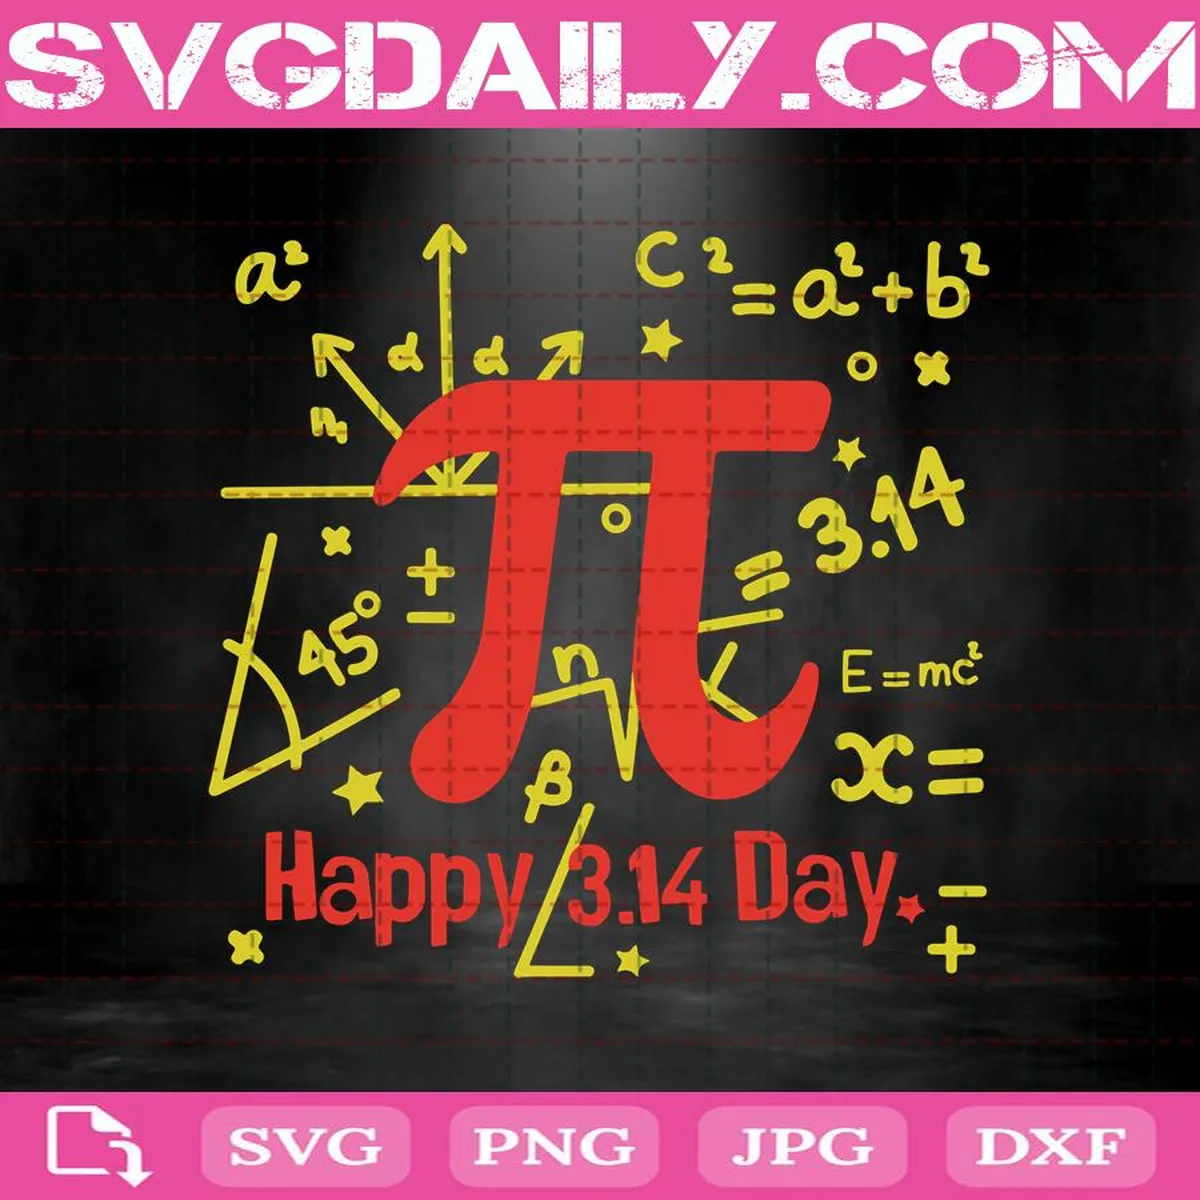 Happy 3.14 Day Svg, Pi Day Svg, Happy Pi Day Svg, Pi Math Svg, Pi Svg, Pi Number Svg, Math Svg, Svg Png Dxf Eps AI Instant Download